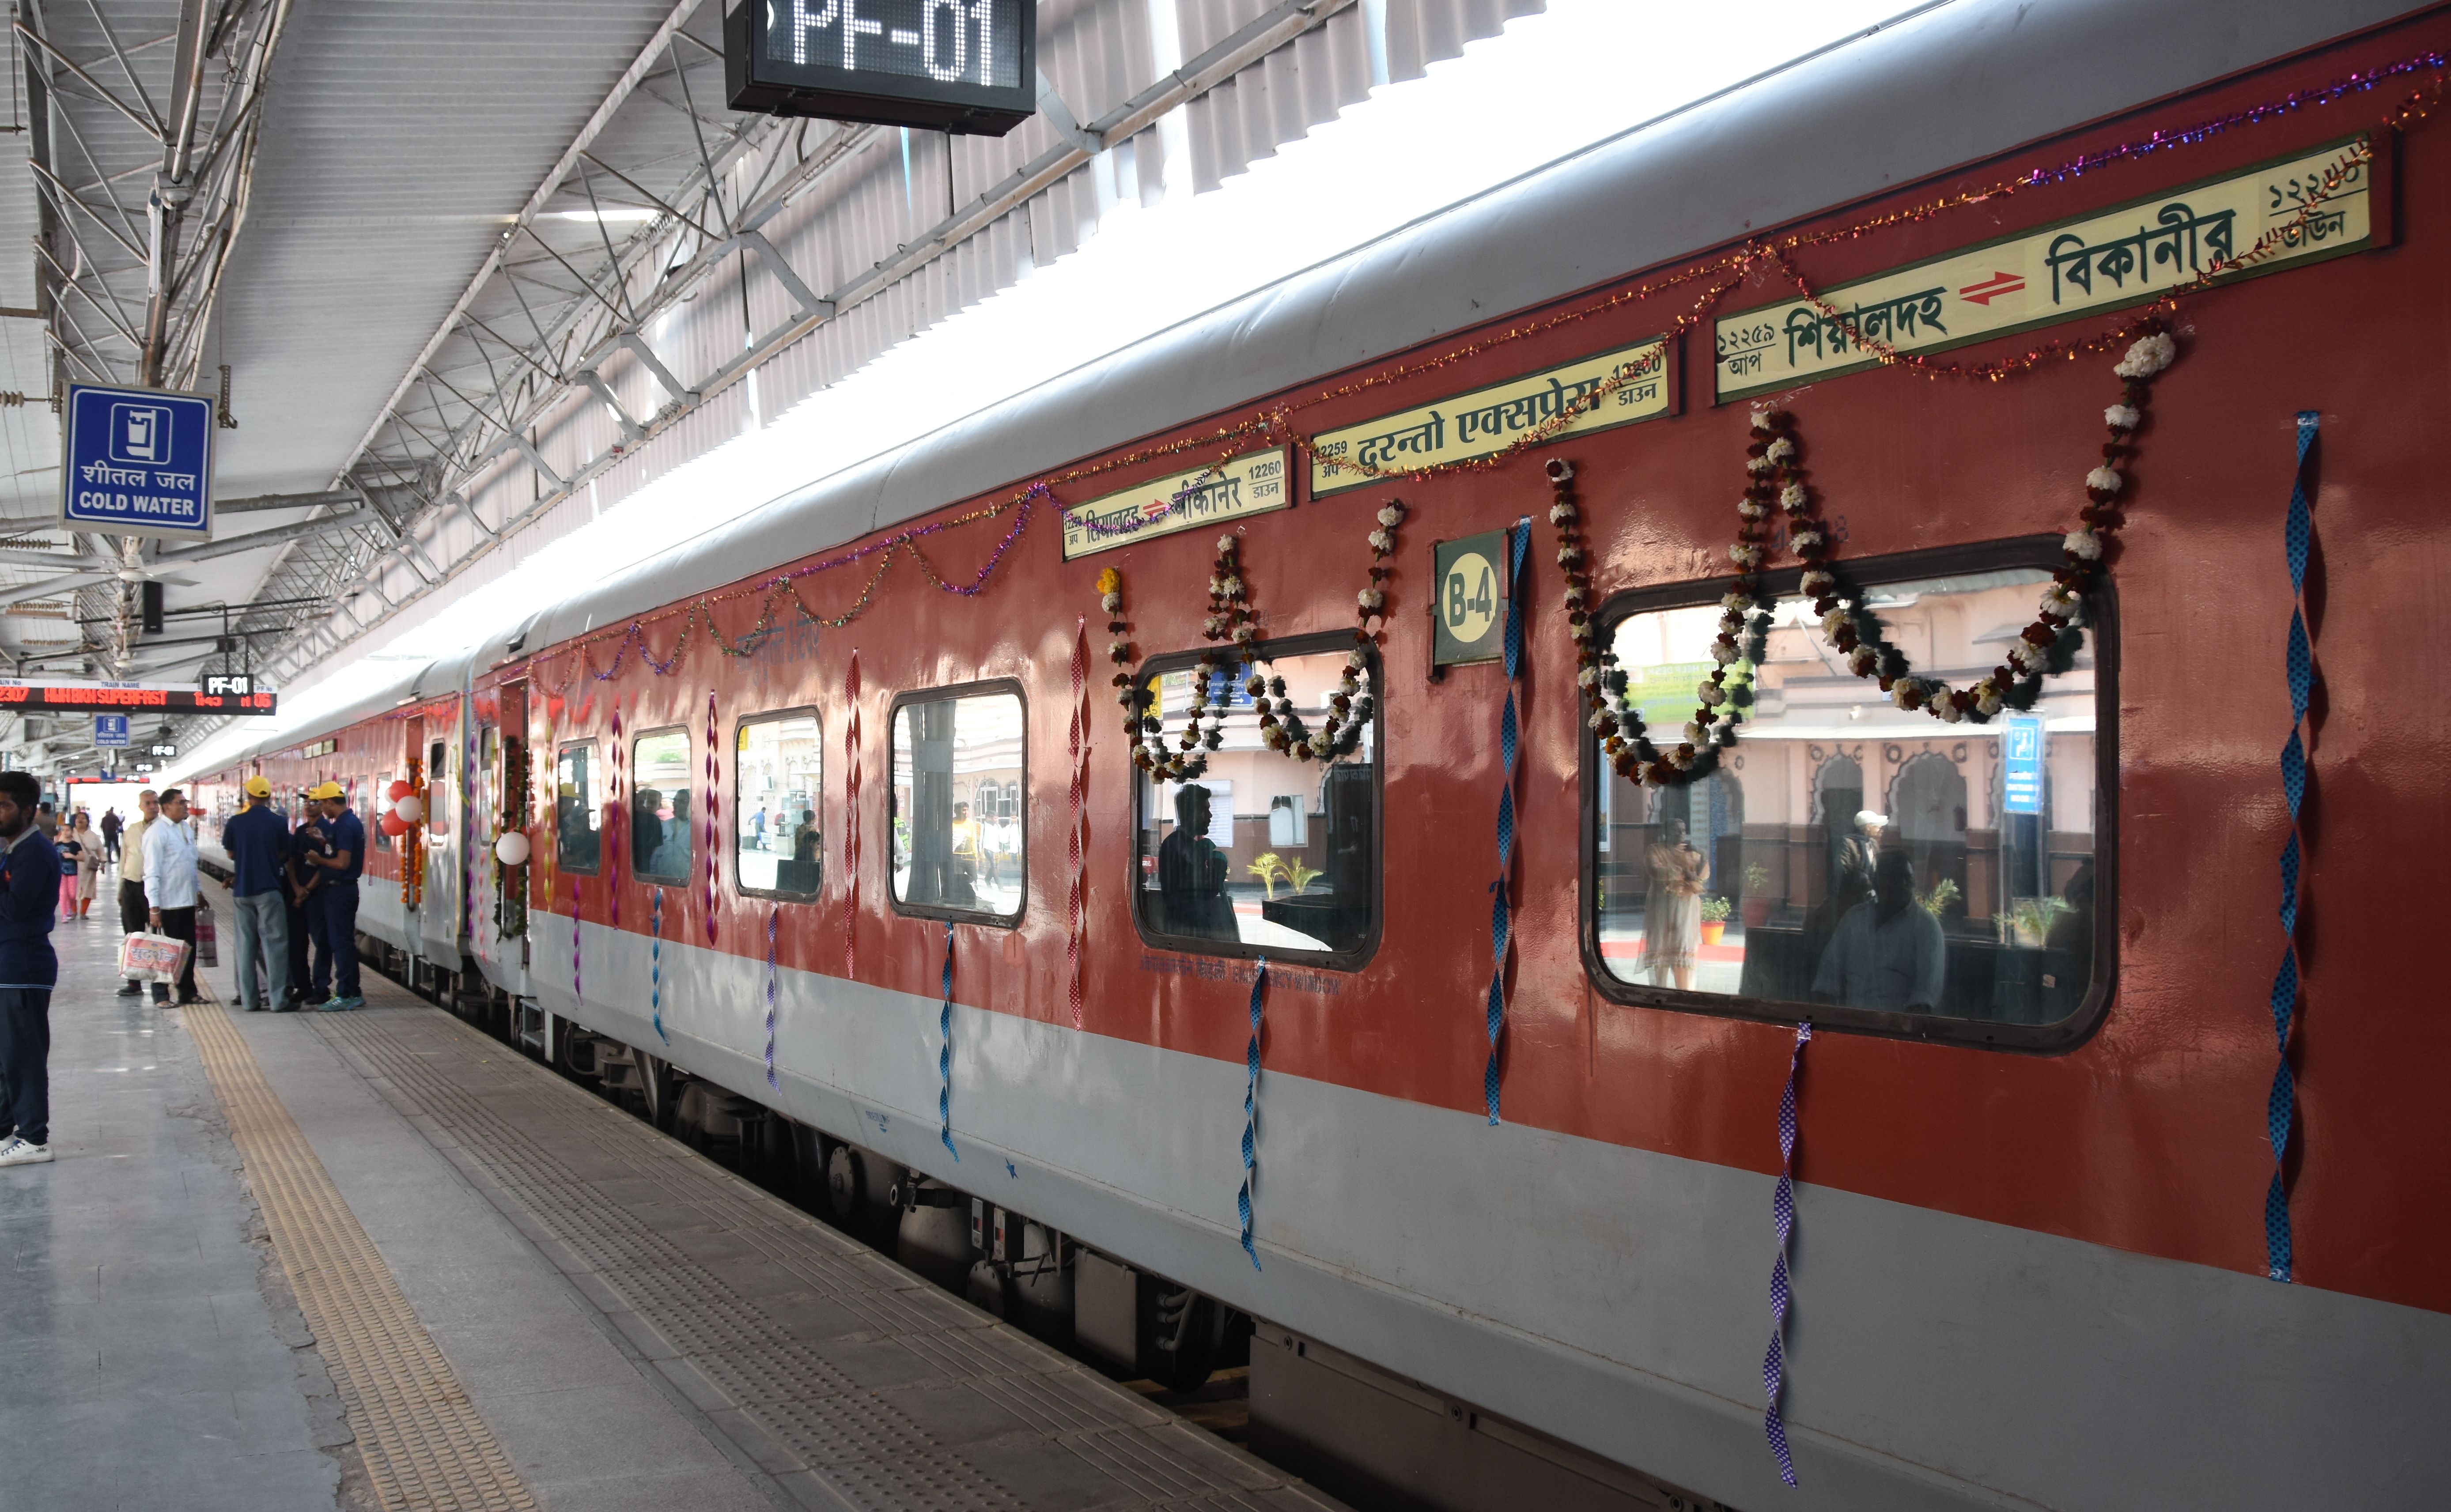 Temporary coaches in trains